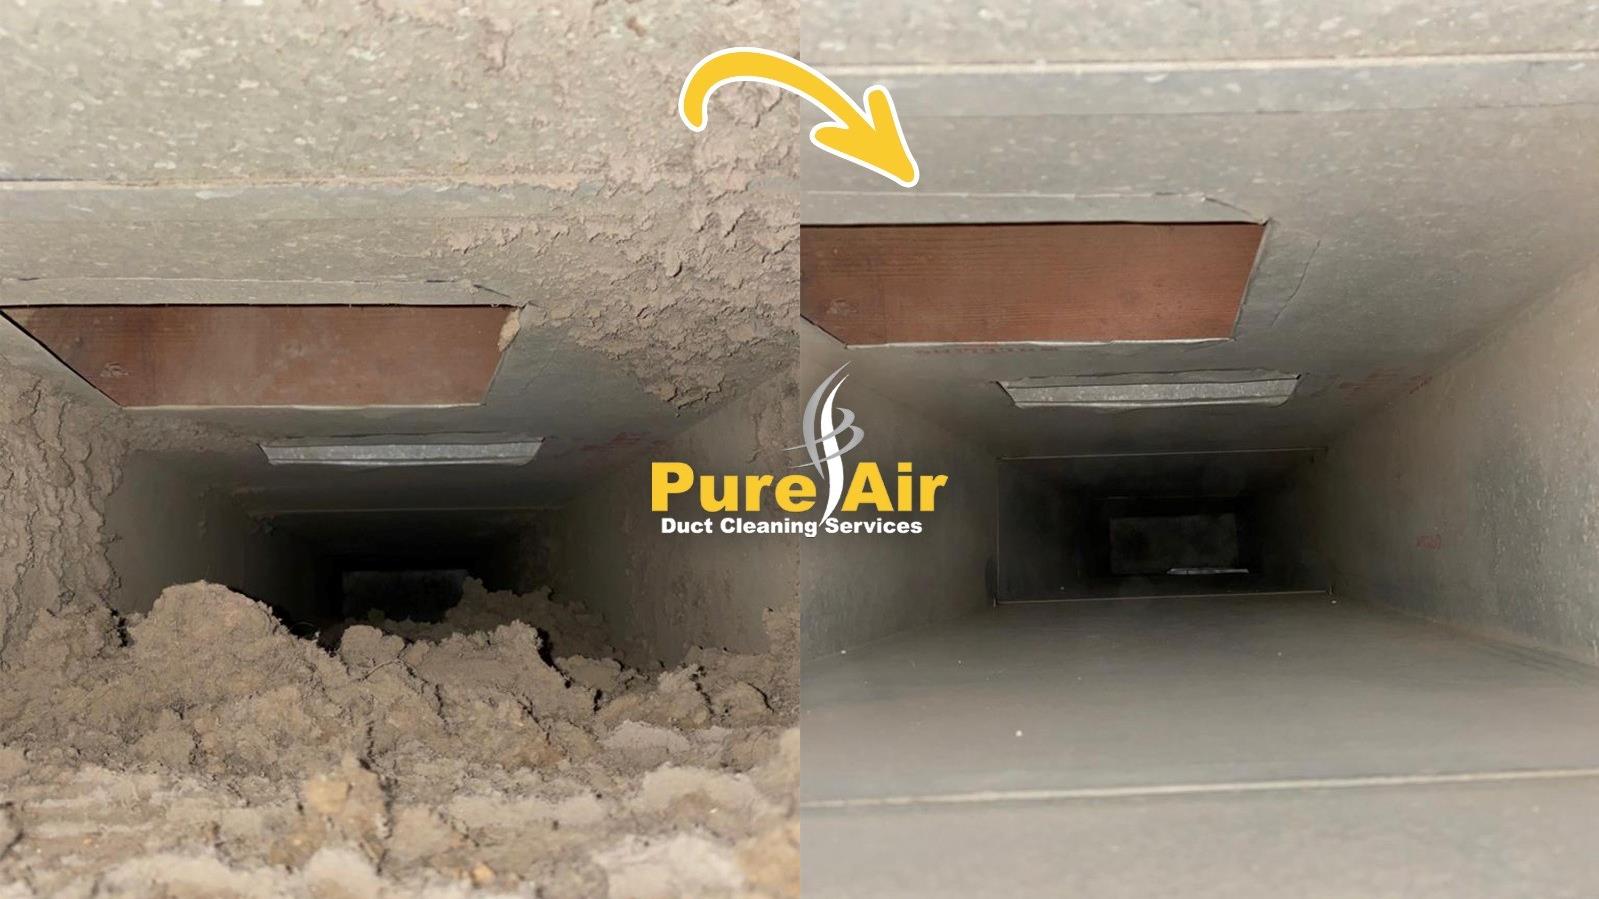 Pure Air Duct Cleaning Services VA/Air Duct Cleaning                                                                                                                                                                                       